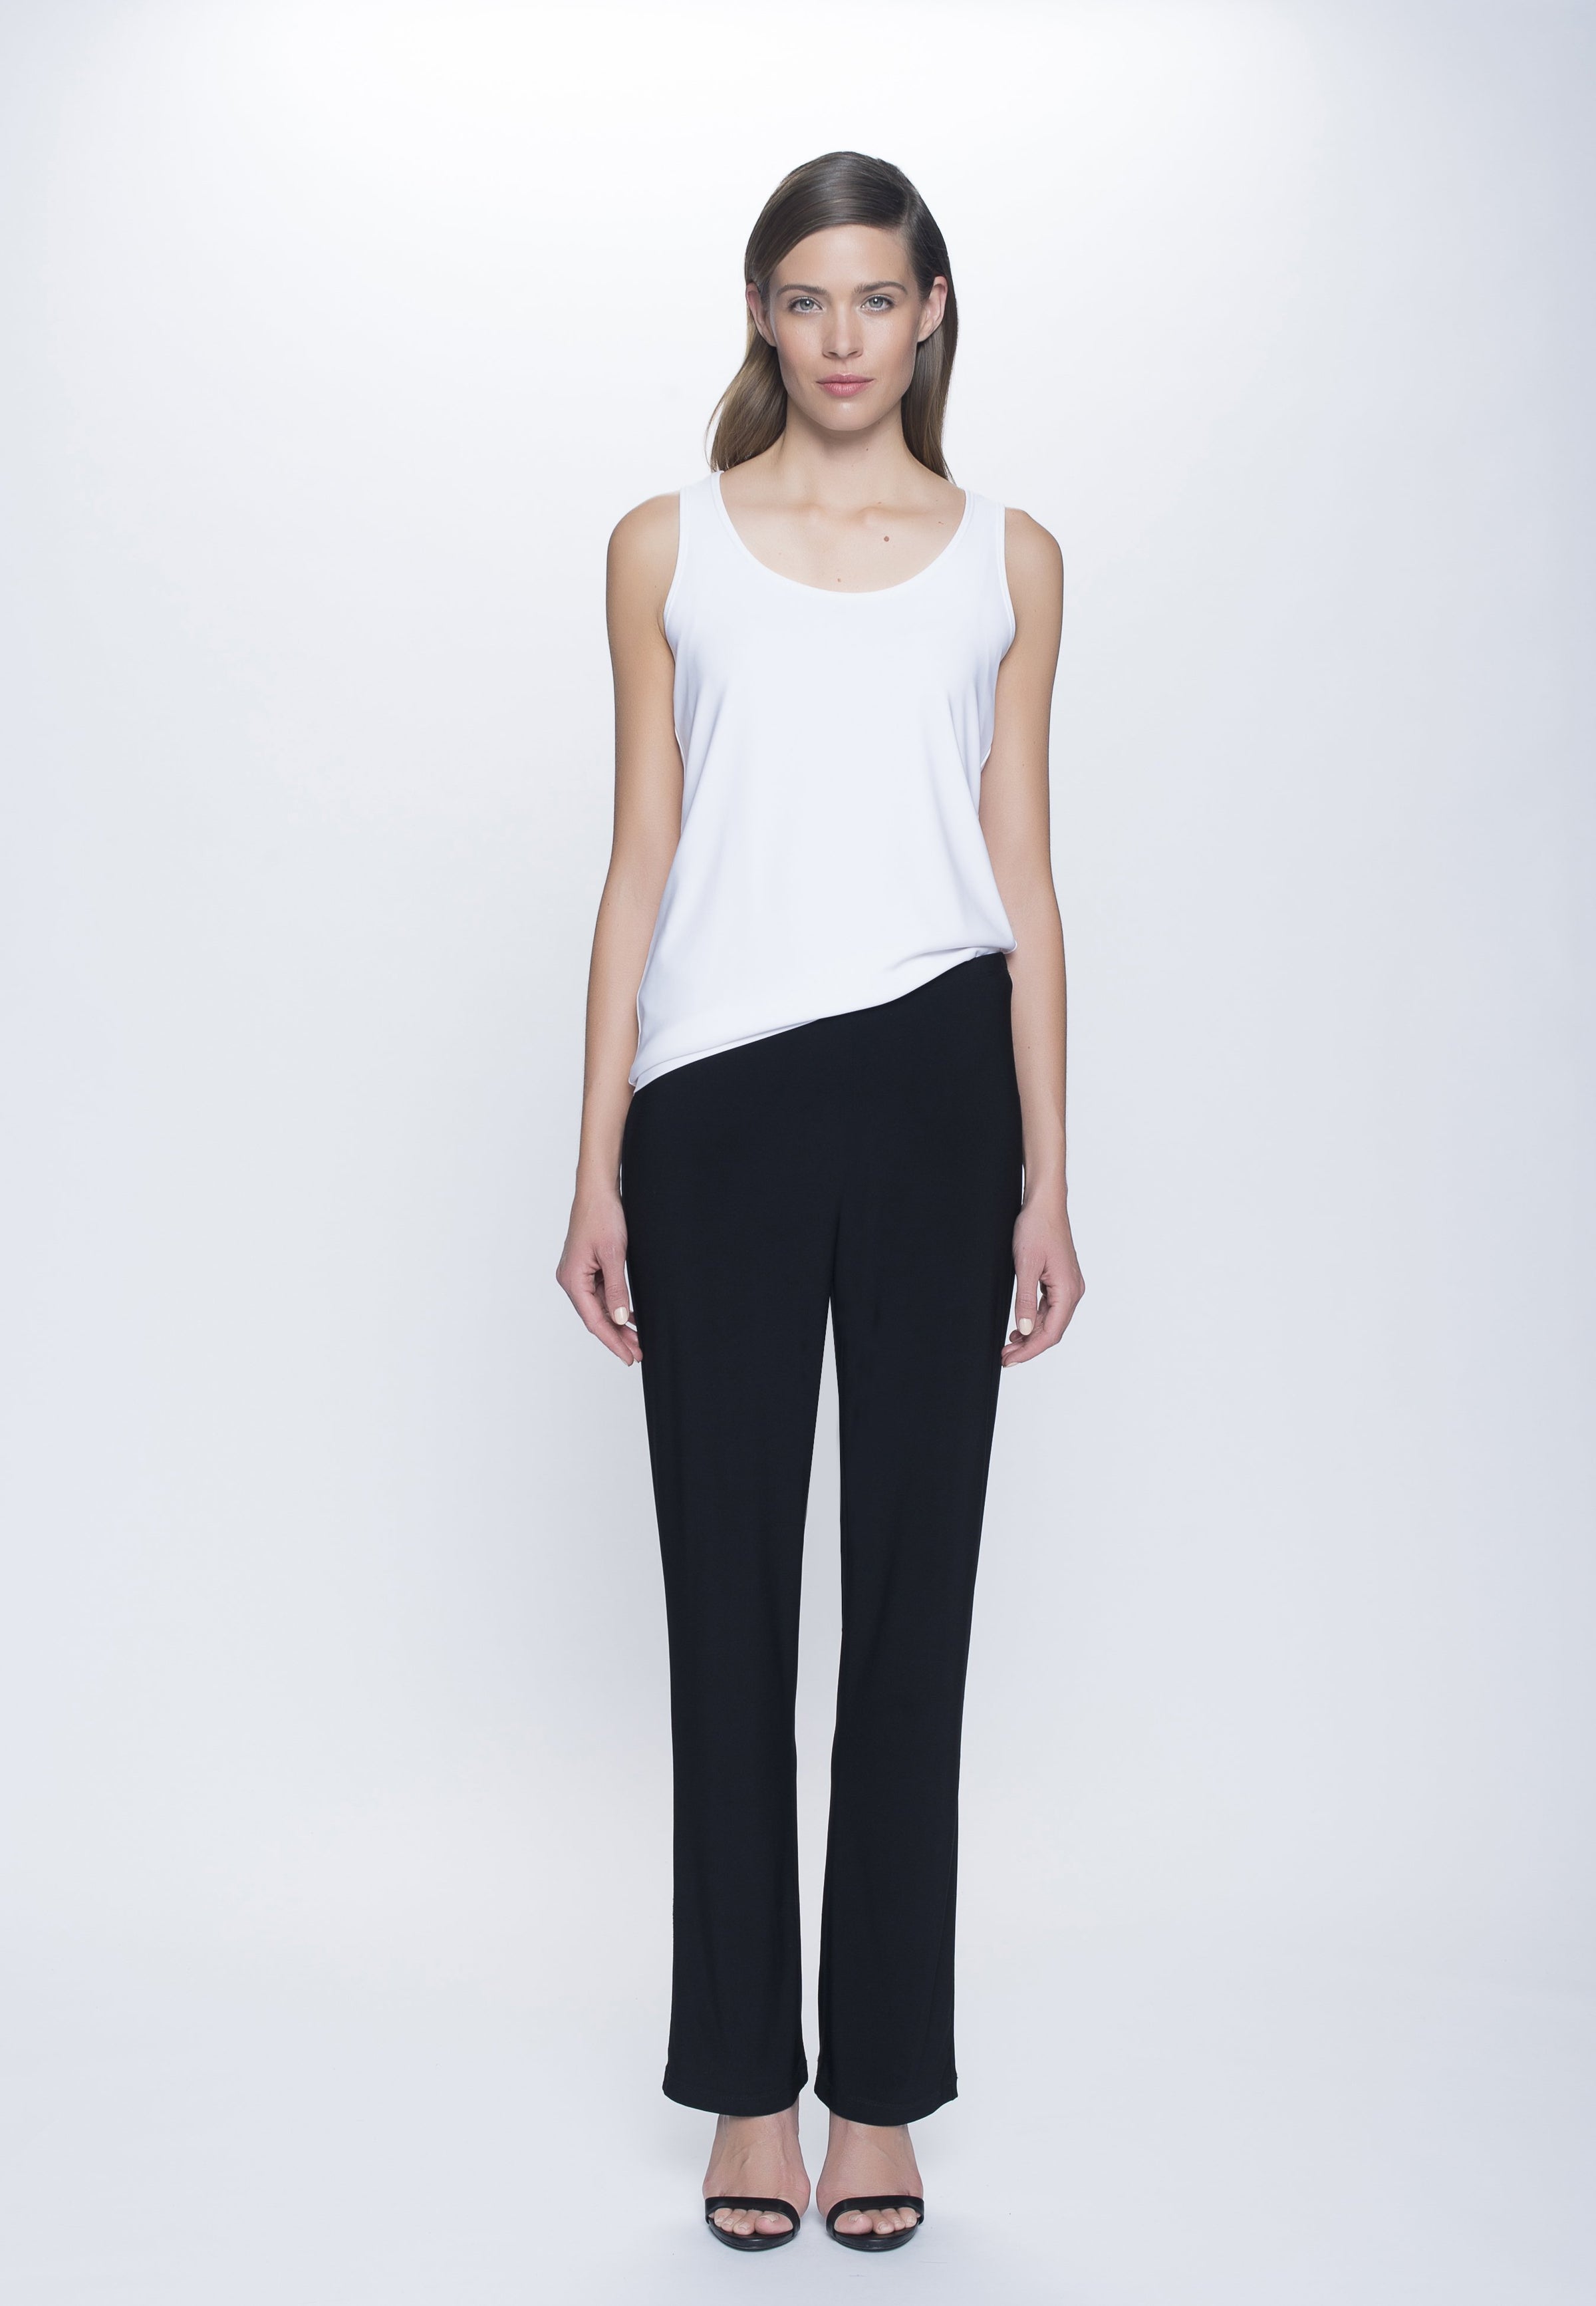 Relaxed Straight Pull-On Pants